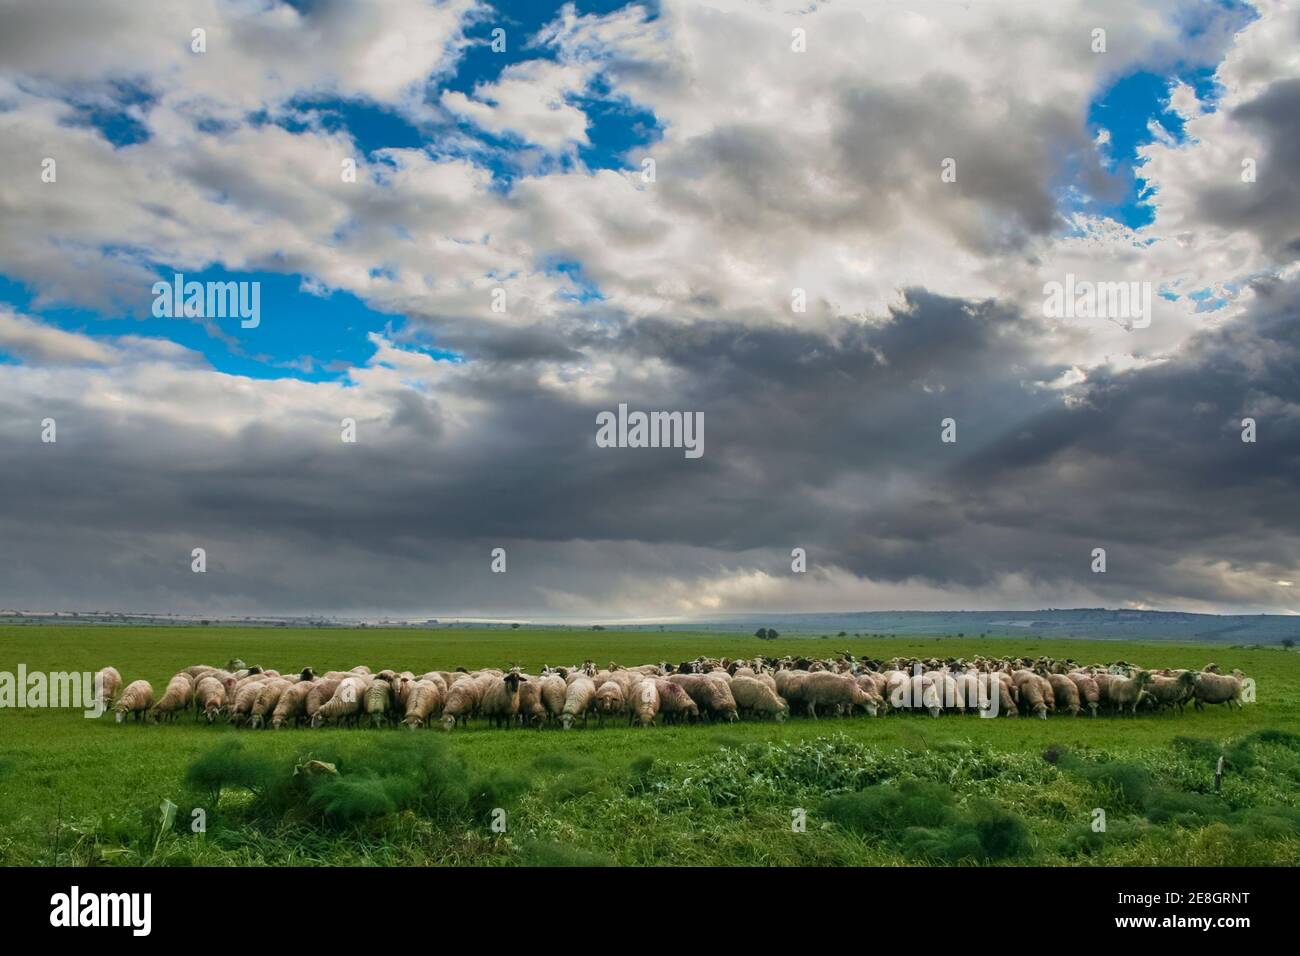 Hilly rural landscape:Alta Murgia National Park.Flock of sheep and goats grazing in a gloomy winter day. Italy, Apulia. Stock Photo